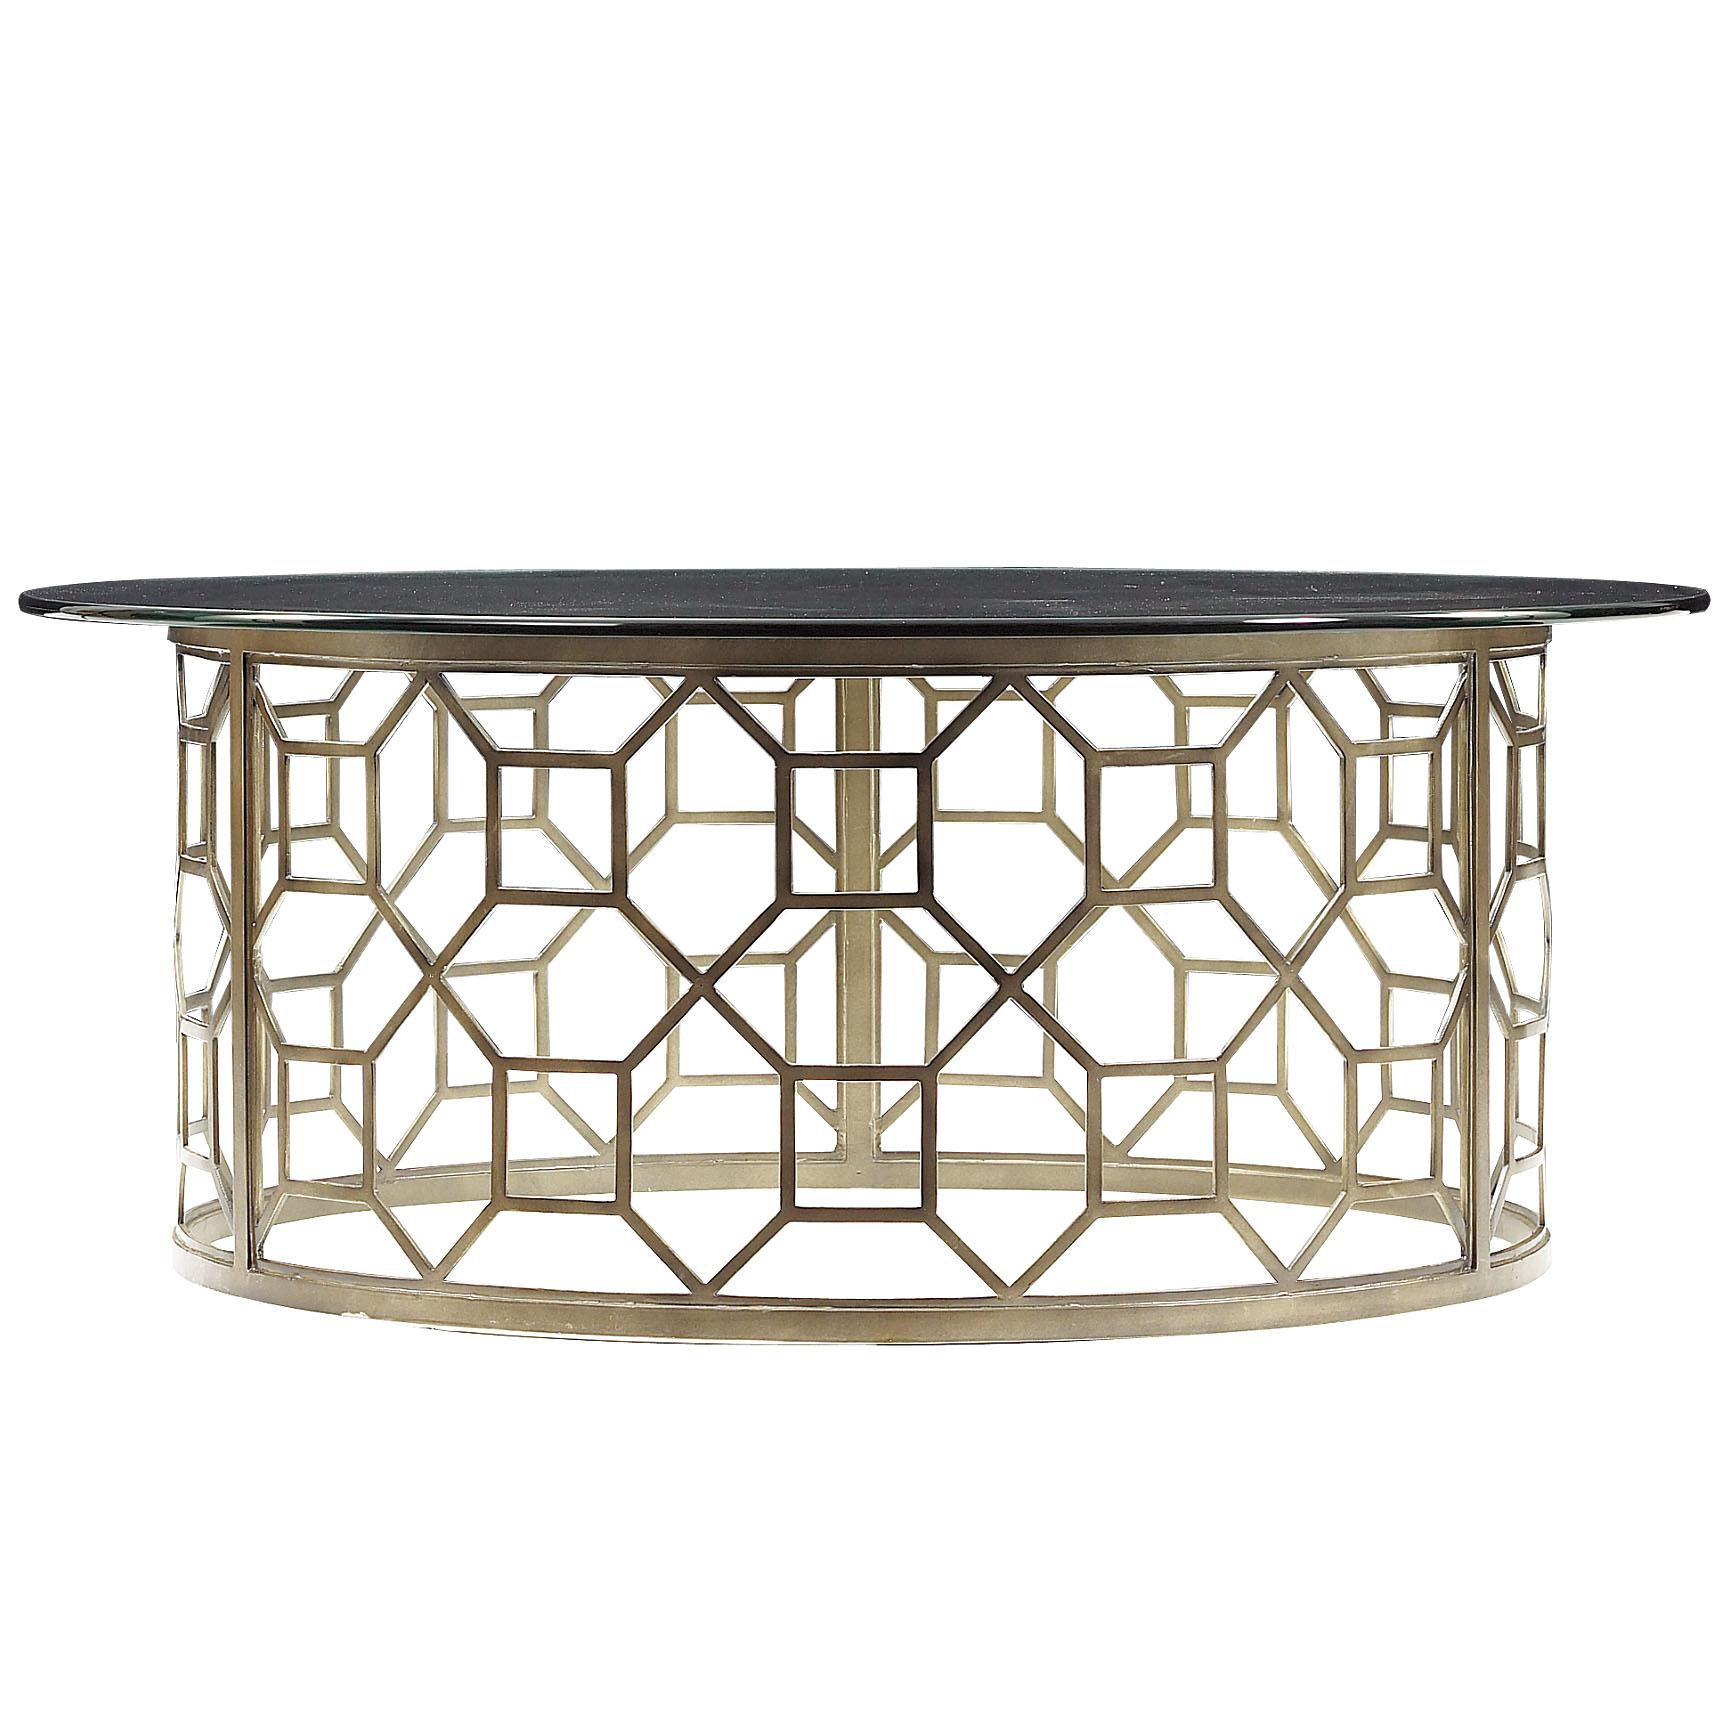 stanley furniture avalon heights roxy round glass cocktail table products color accent with metal octagon pedestal base ahfa coffee locator outdoor side inch console wedge shaped